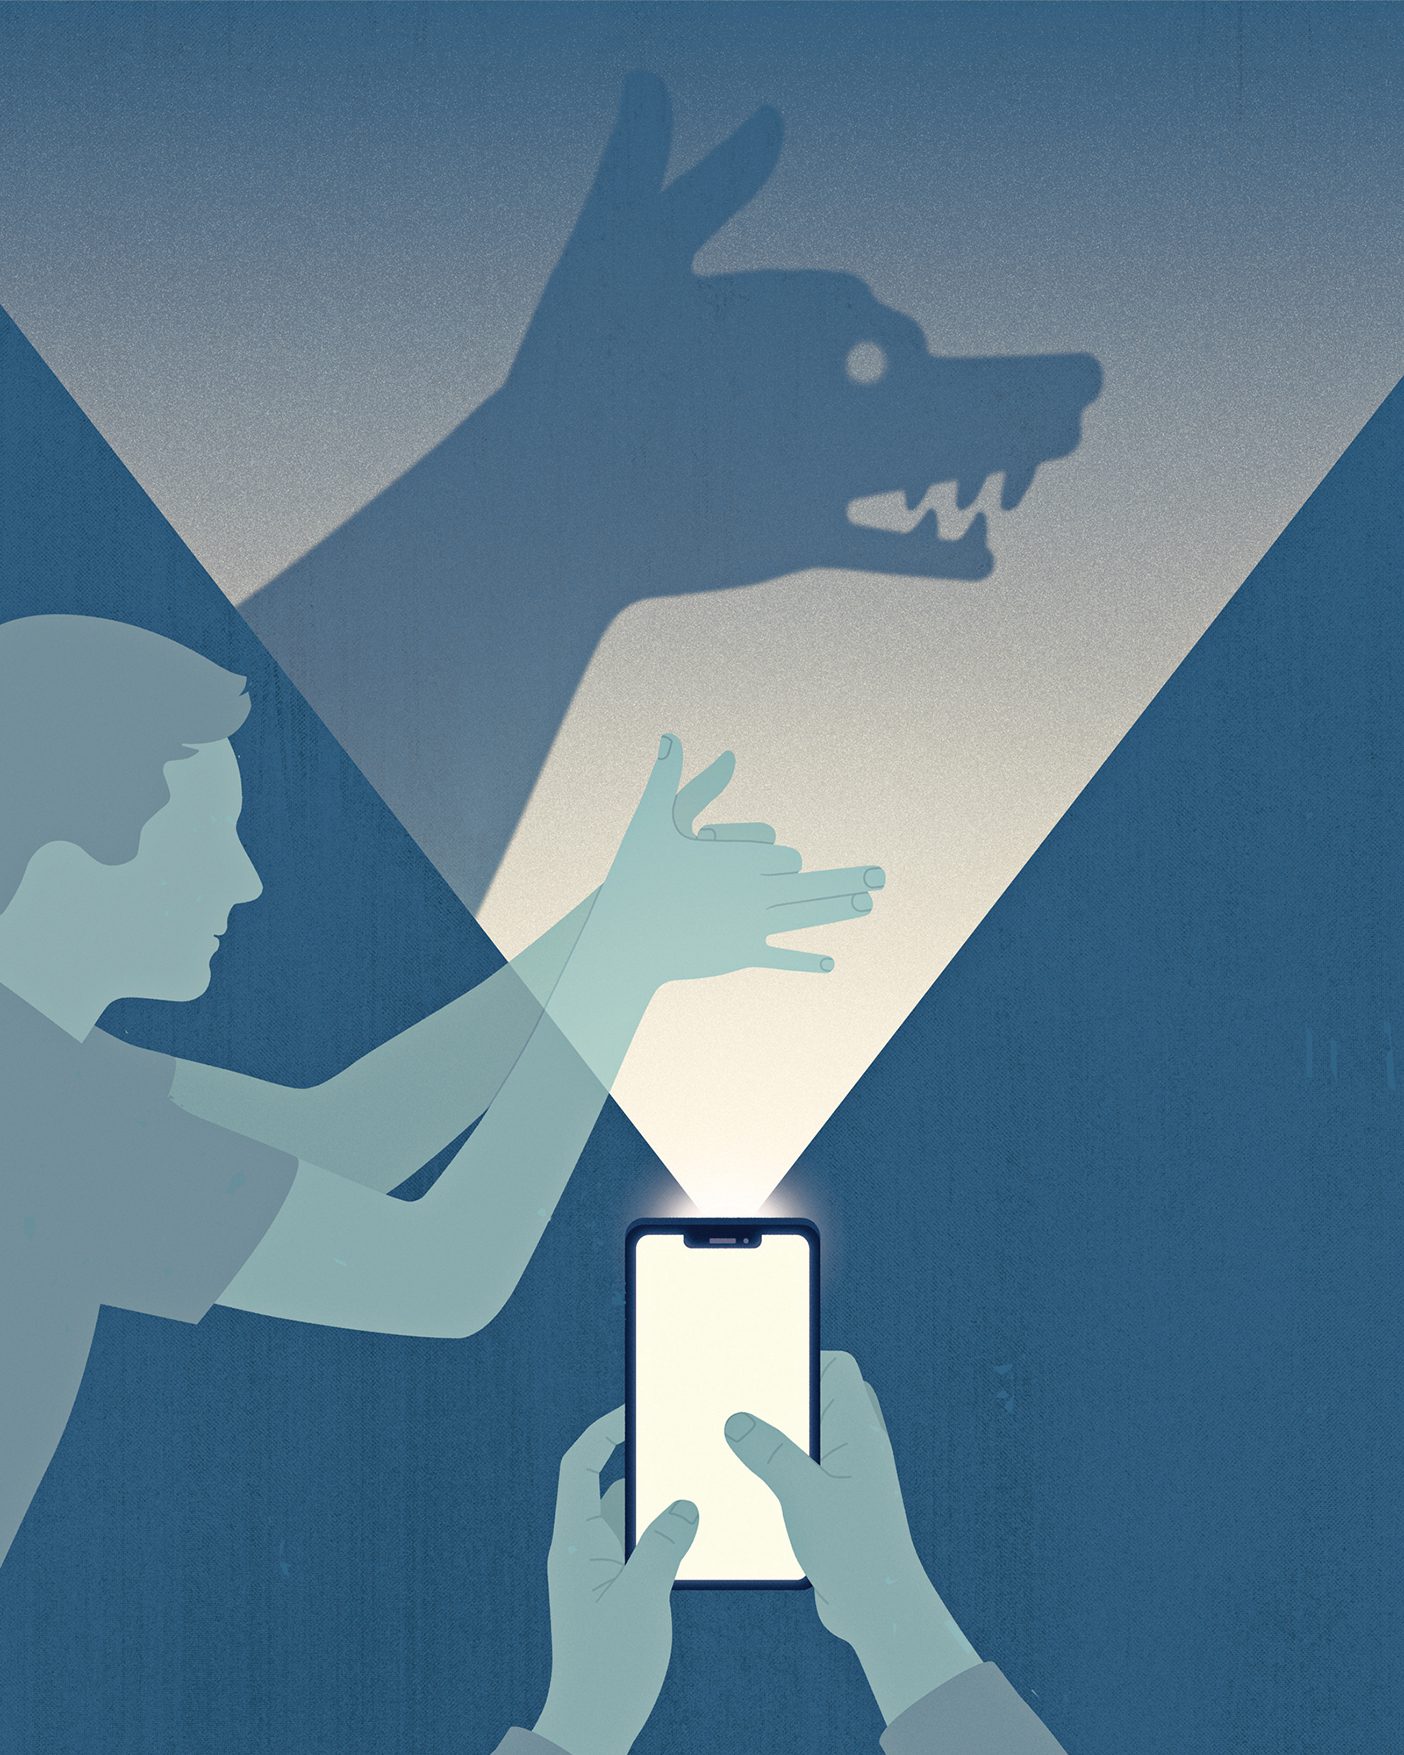 An illustration of a man making a shadow puppet of a dog with a smartphone flashlight as the light. The shadow shows a fanged wolf rather than a dog.